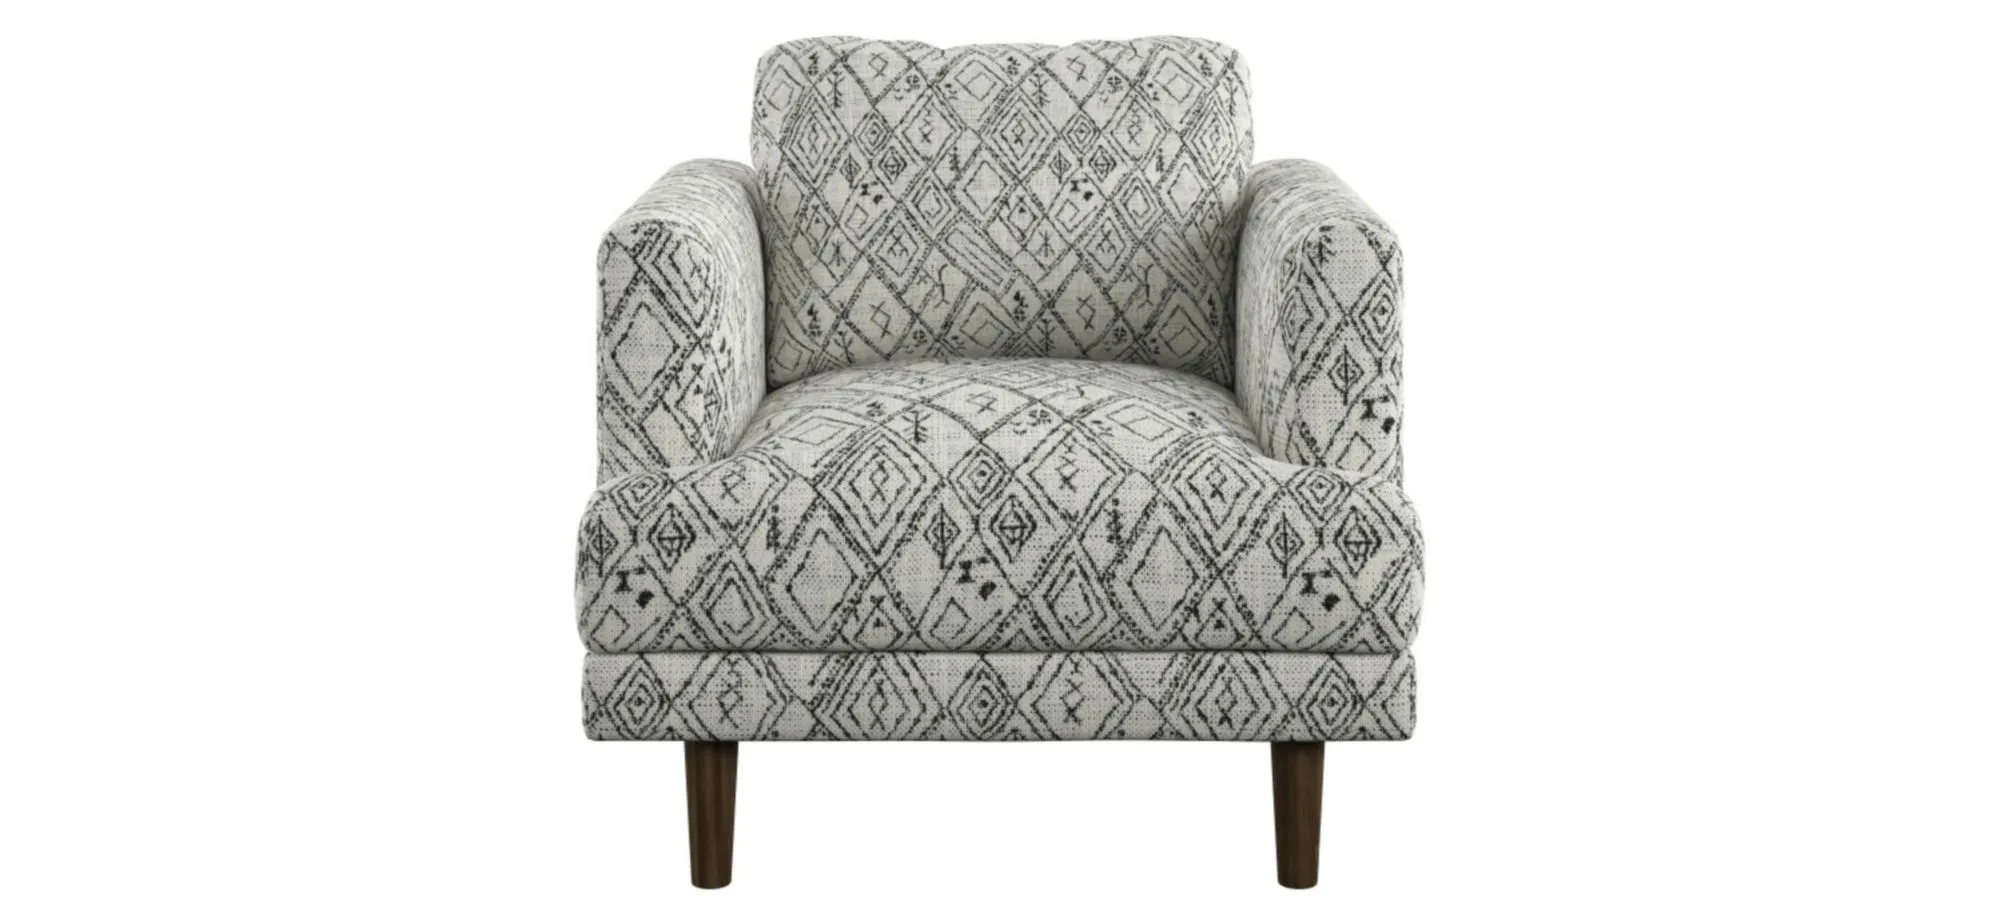 Juno Accent Chair in petroglyph by Emerald Home Furnishings